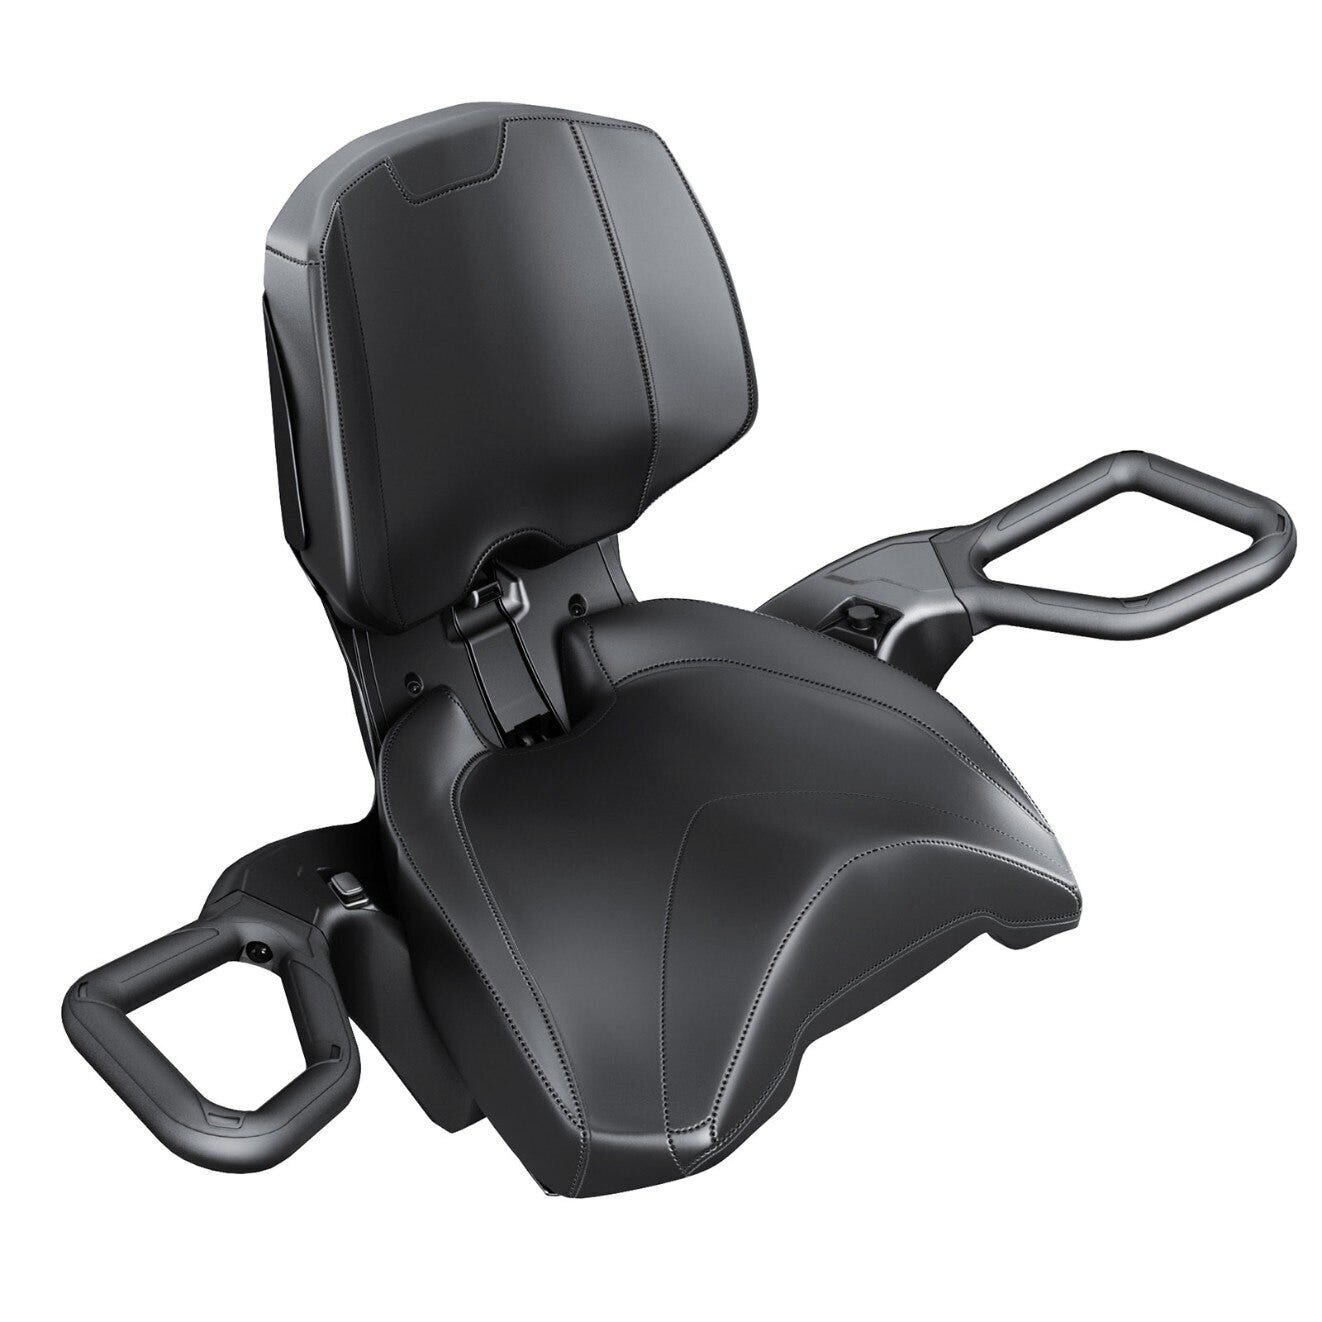 Heated Passenger Grips and Visor Outlet